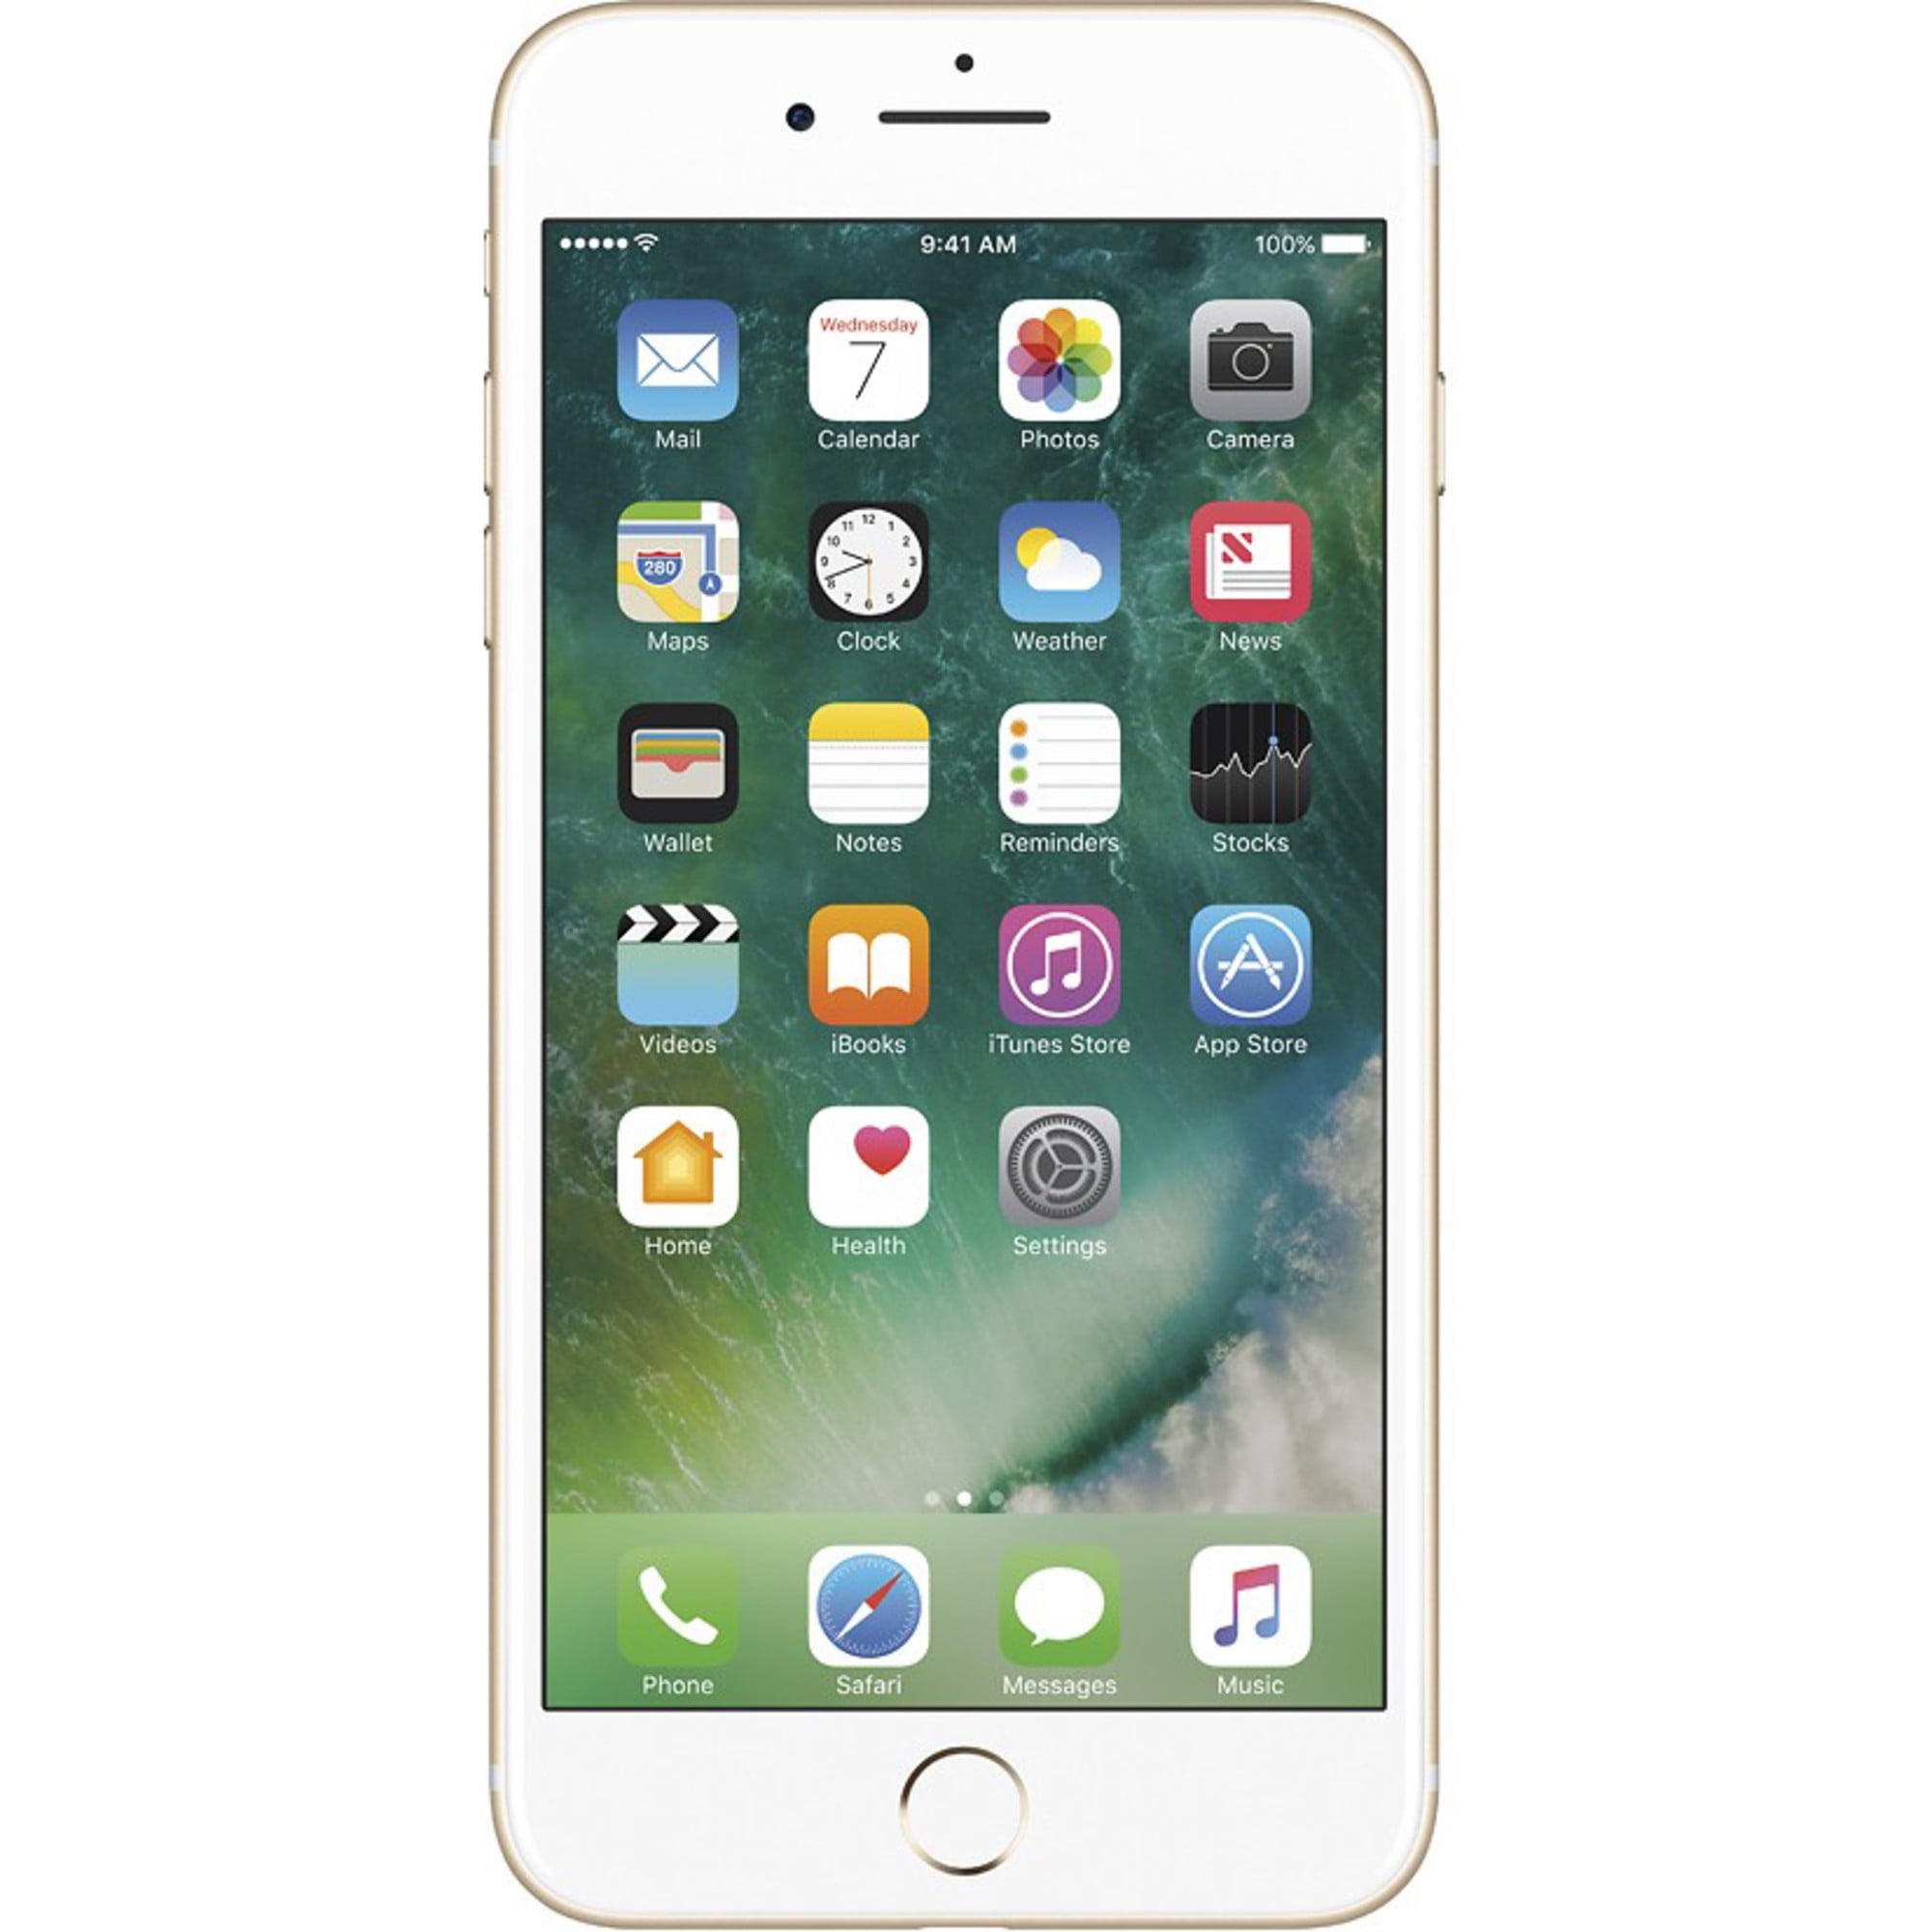 Apple iPhone 7 Plus 32GB Gold GSM Unlocked (AT&T + T-Mobile) Smartphone -  Grade B Used